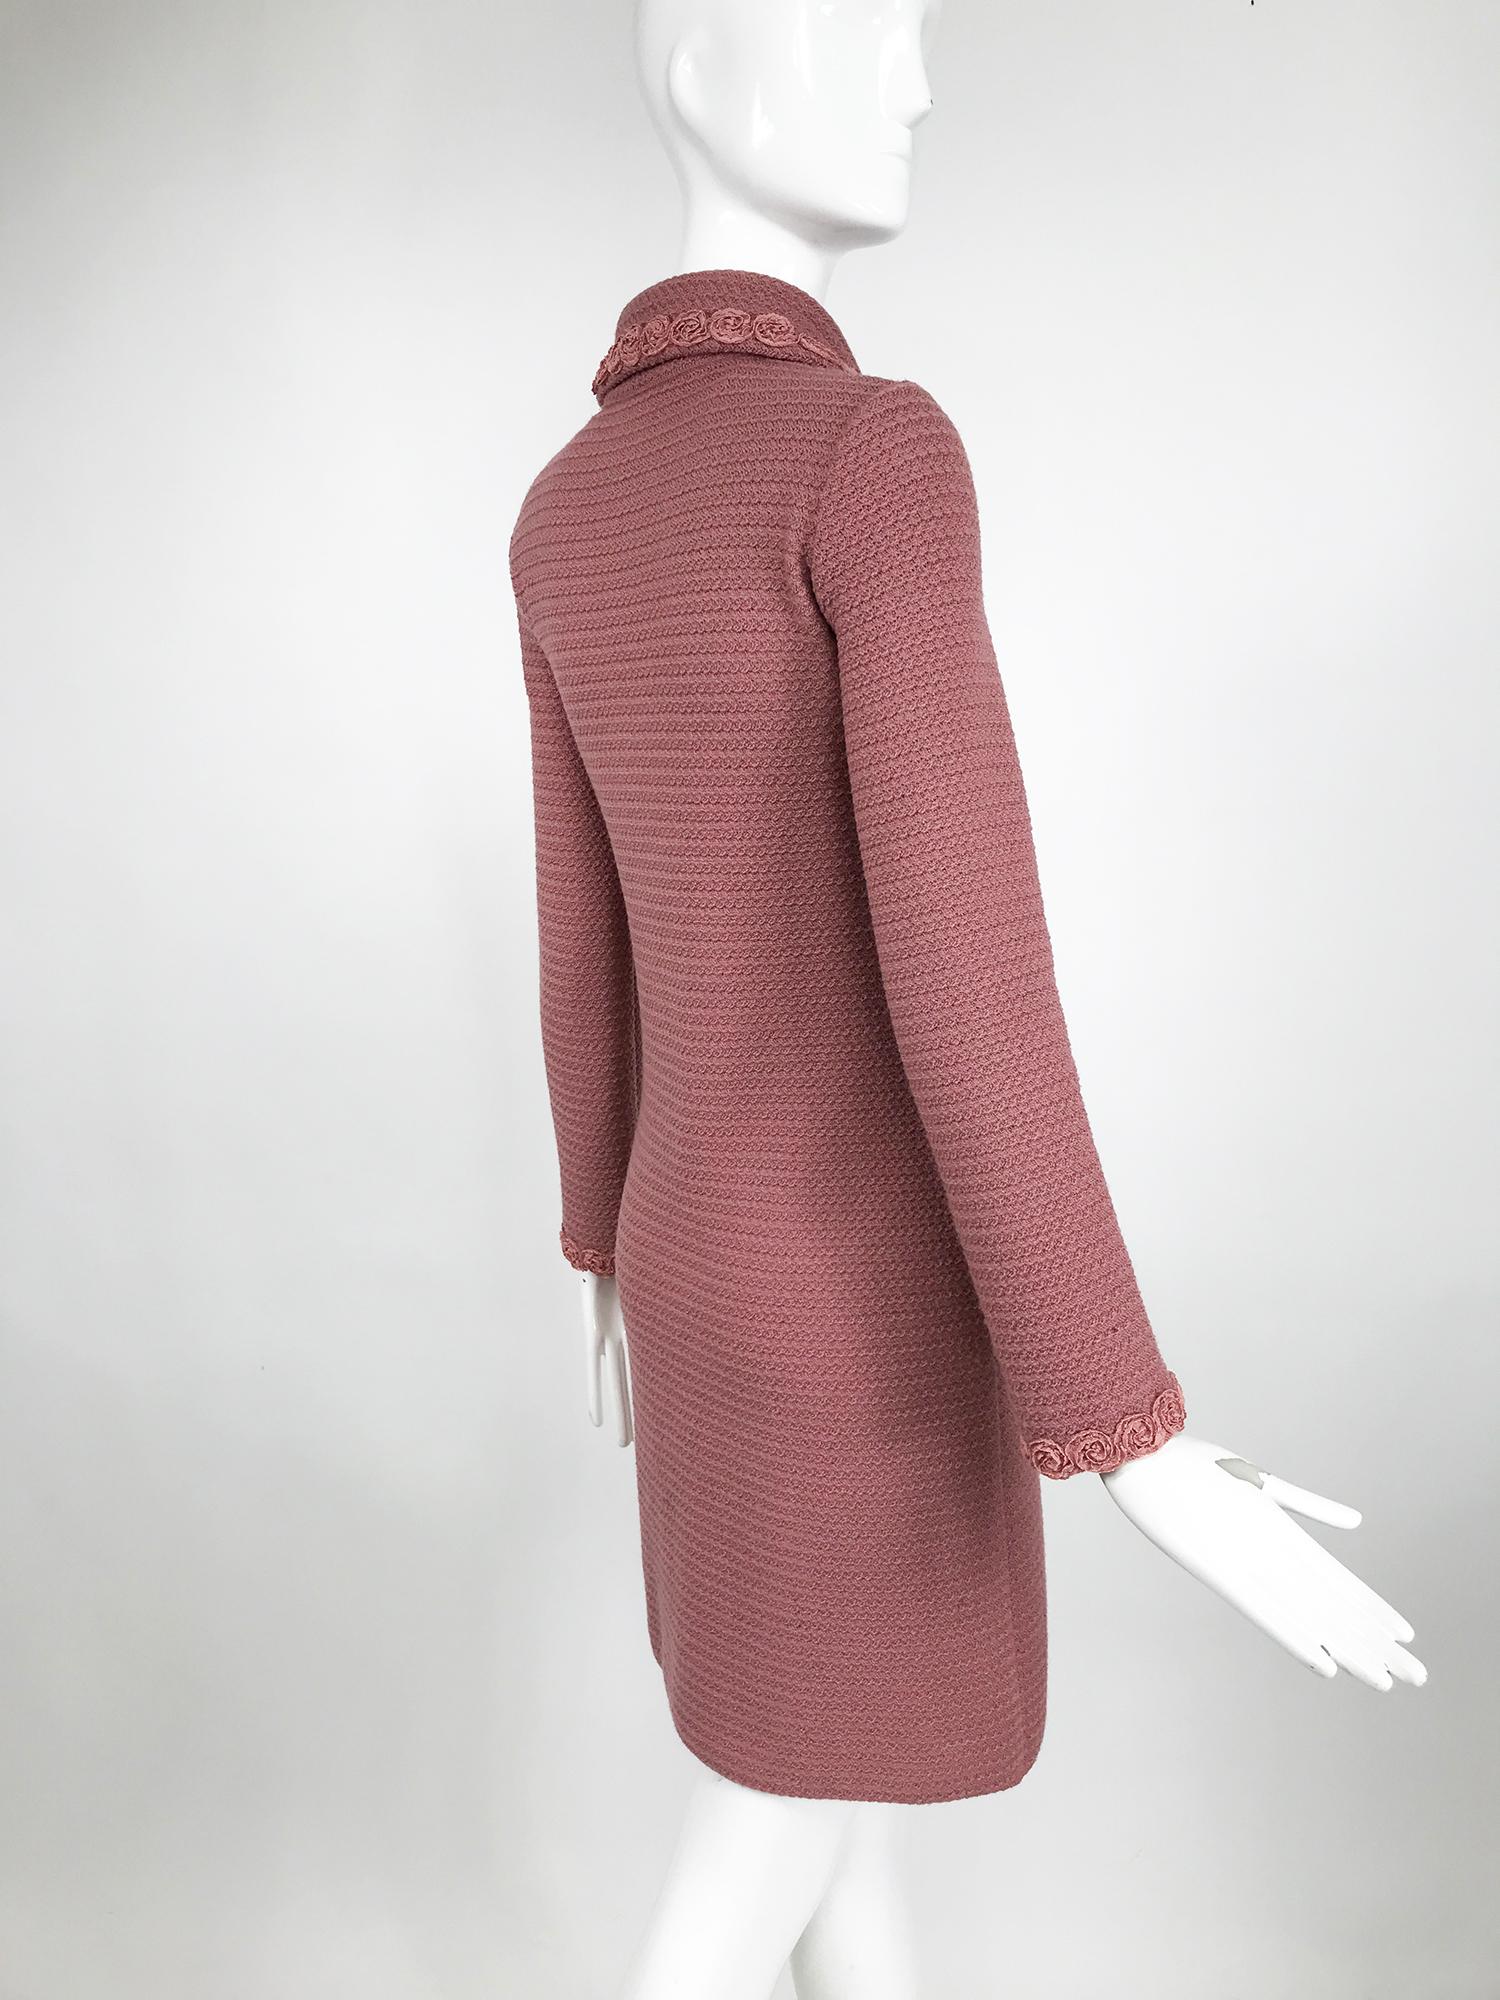 Women's Moschino Pink Wool Knit Coat with Rosette Lace Trims